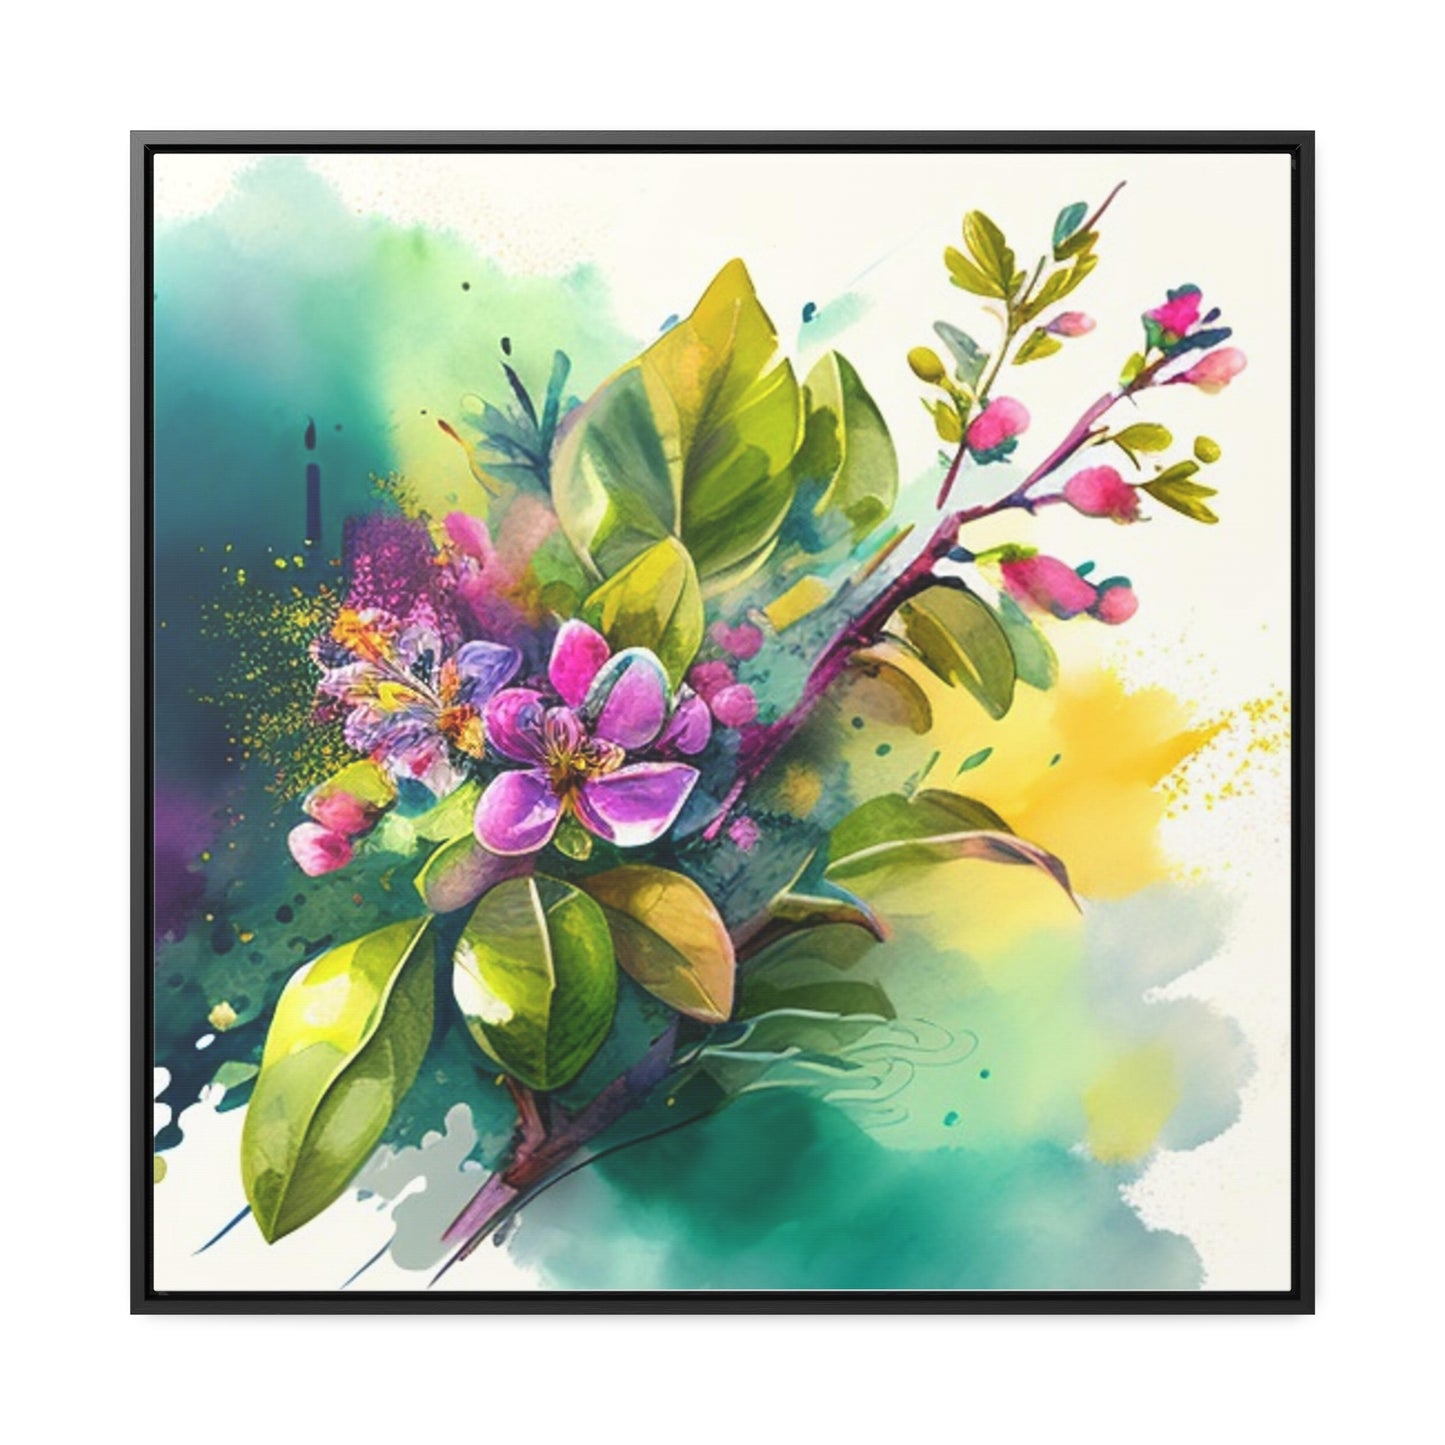 Gallery Canvas Wraps, Square Frame Mother Nature Bright Spring Colors Realistic Watercolor 1